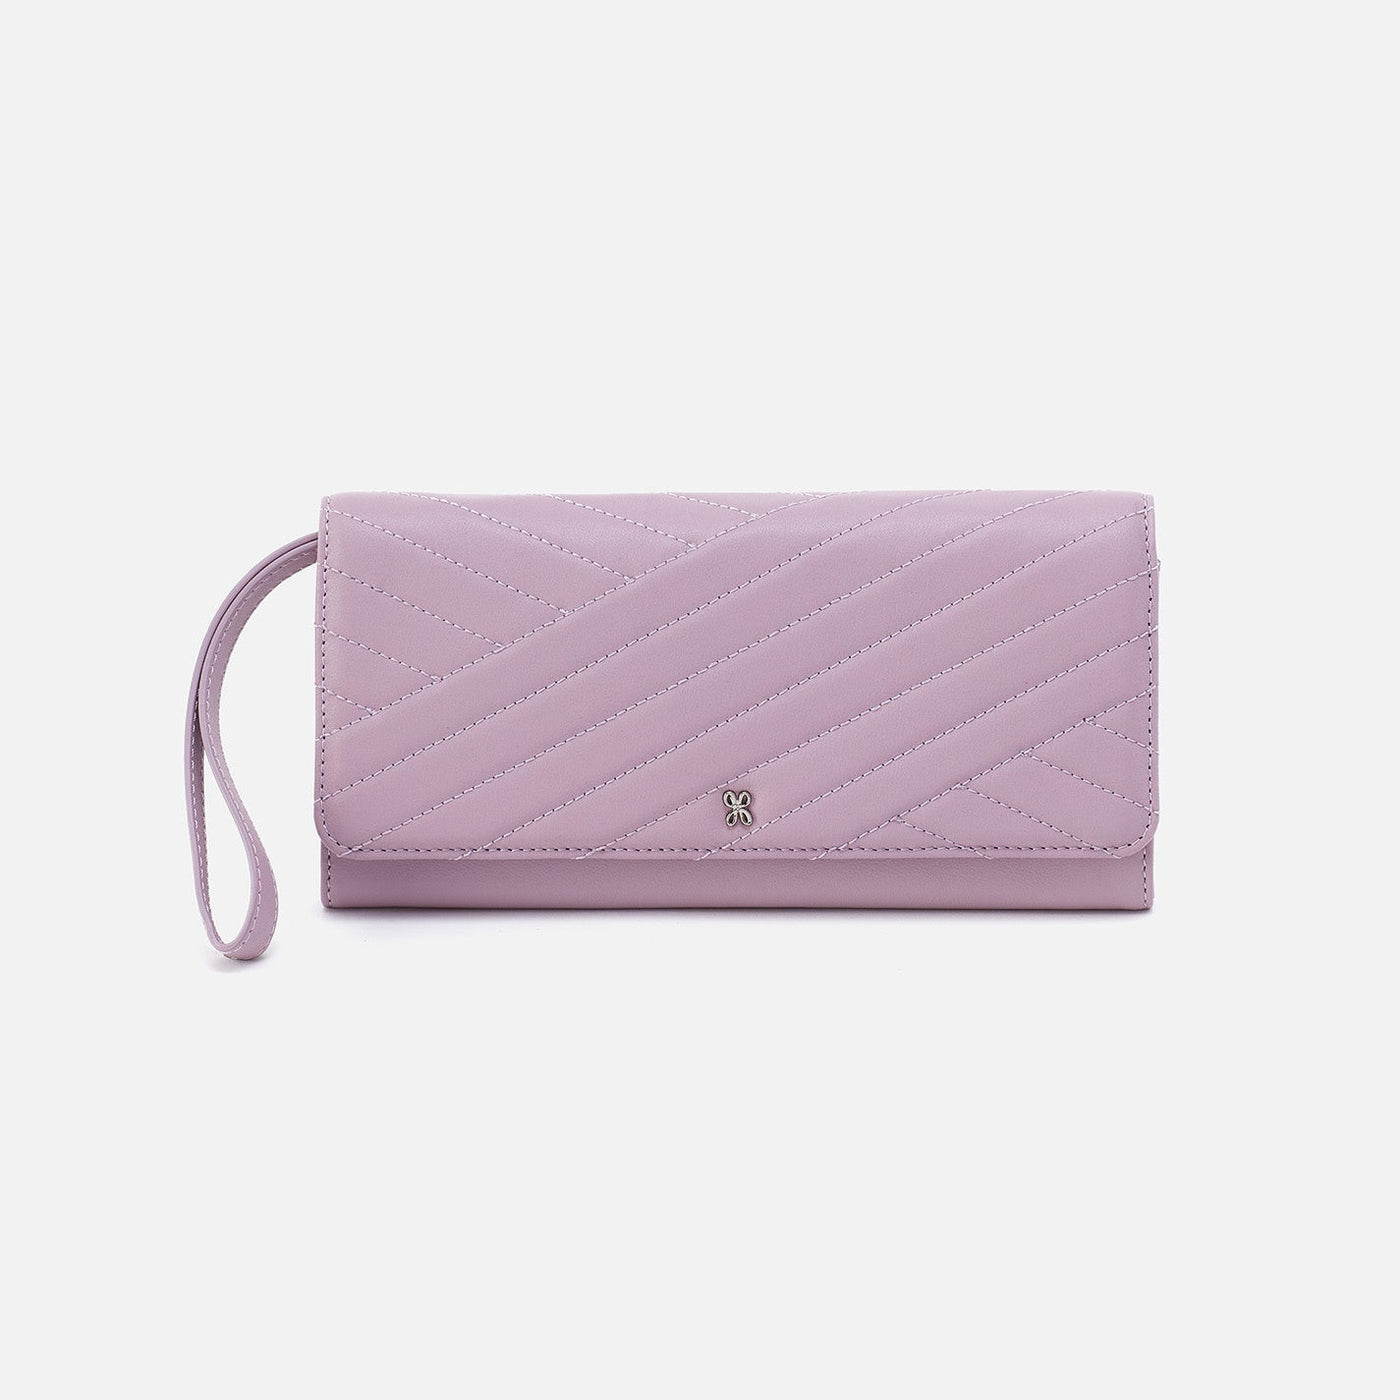 Wander Wallet Wristlet in Quilted Soft Leather - Lavender